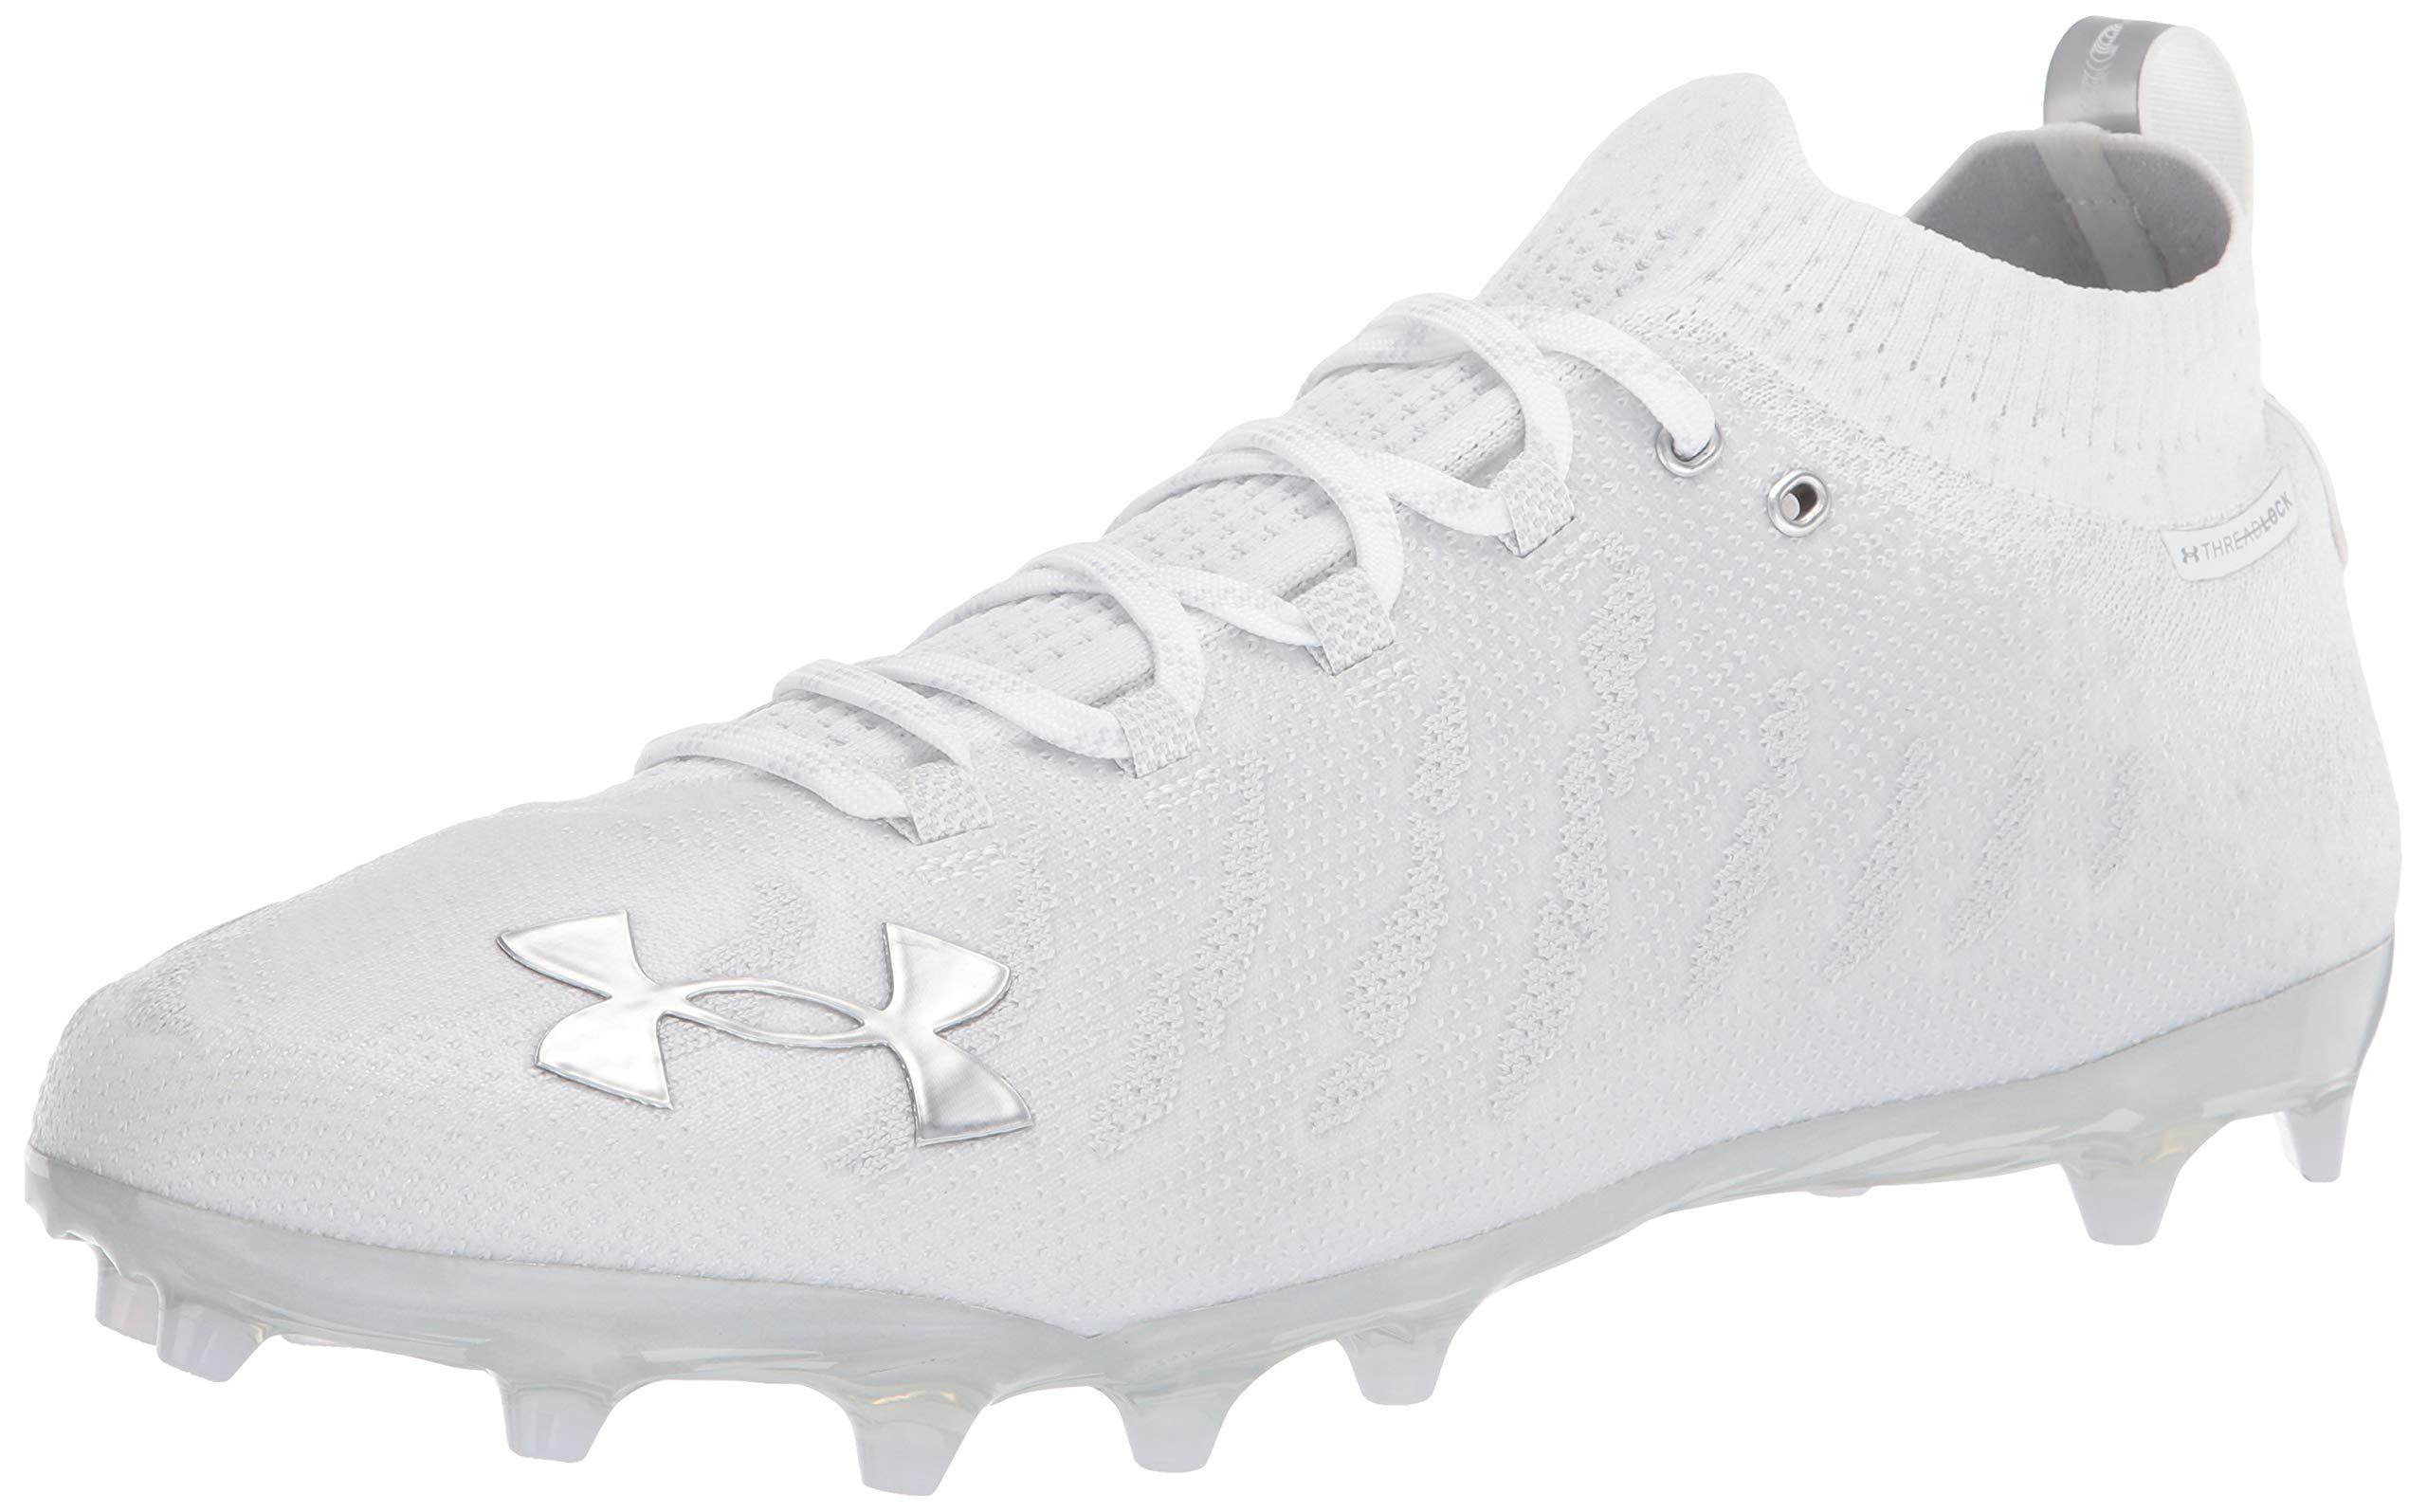 Under Armour Highlight Lux MC Football Cleats White 1258400-103 Size 9 